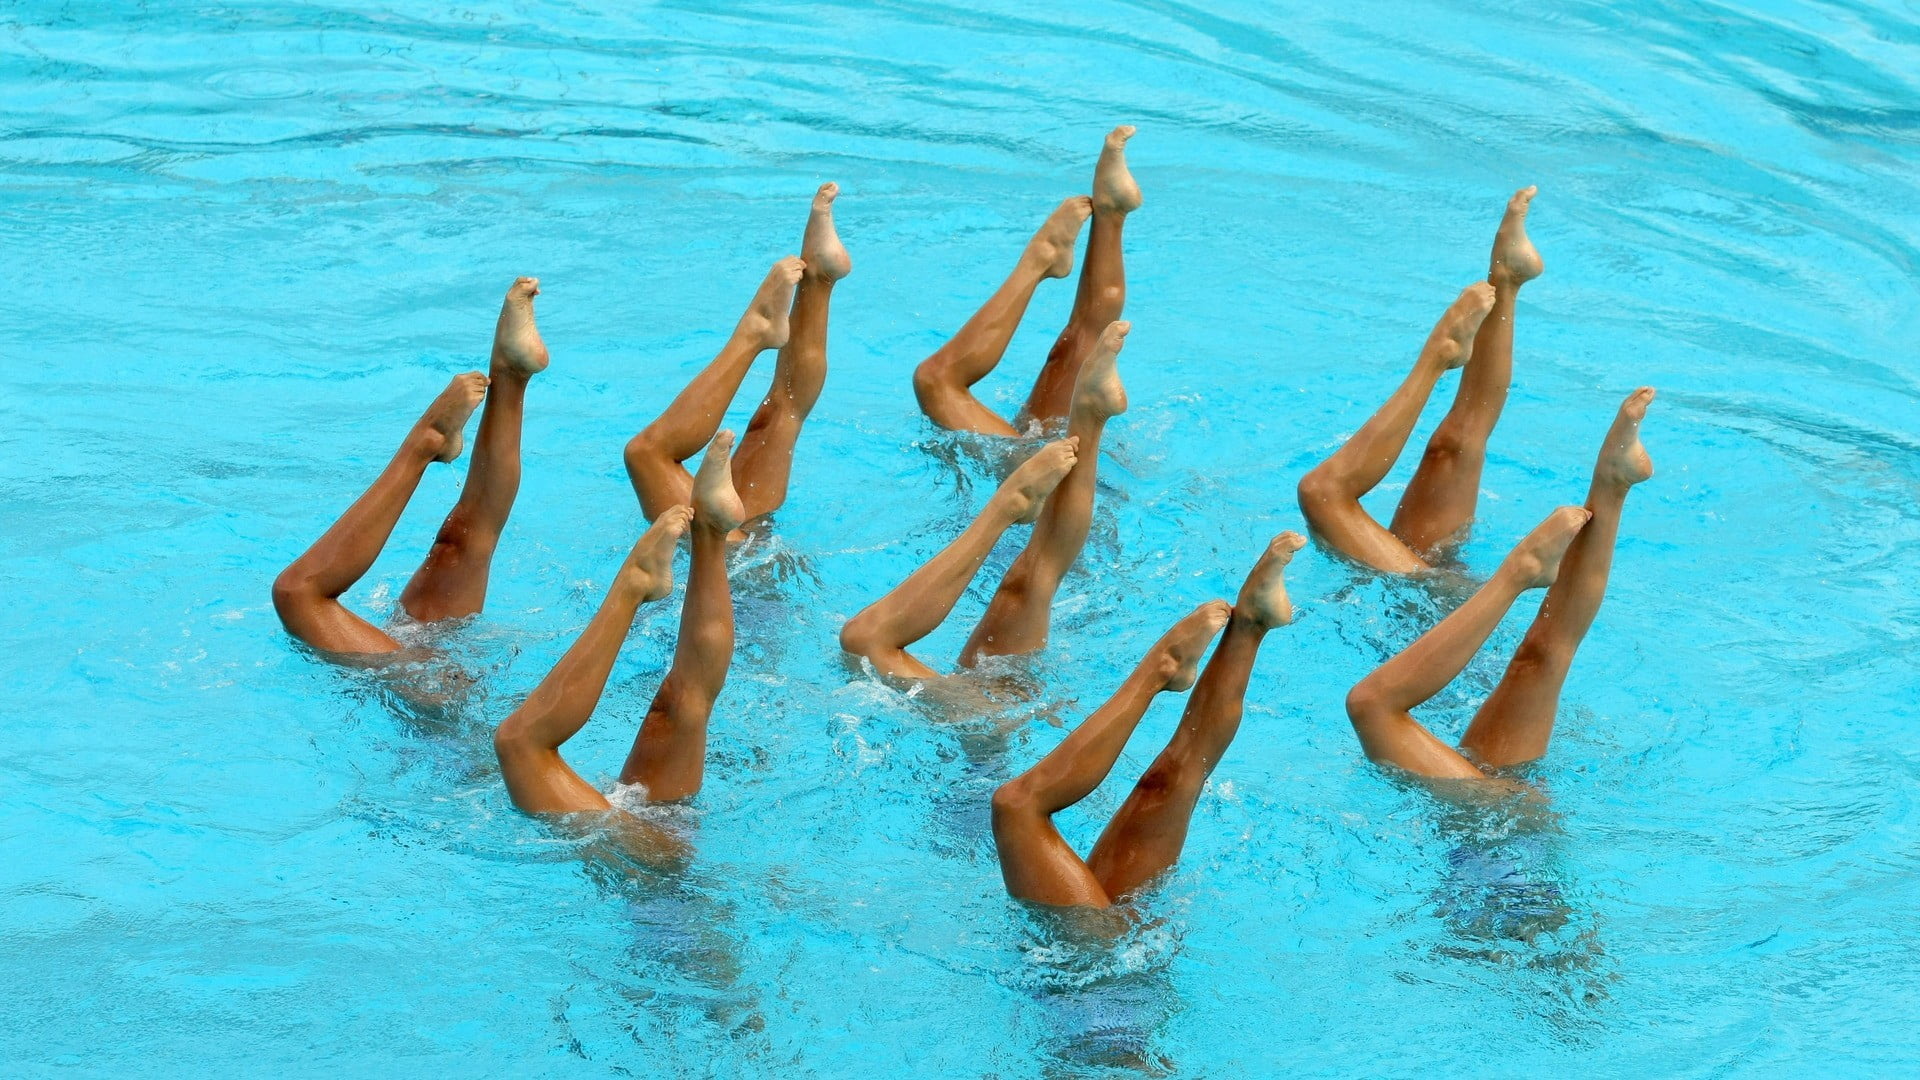 Synchronized Swimming: Artistic techniques and basic sculls training session, Water sports discipline. 1920x1080 Full HD Wallpaper.